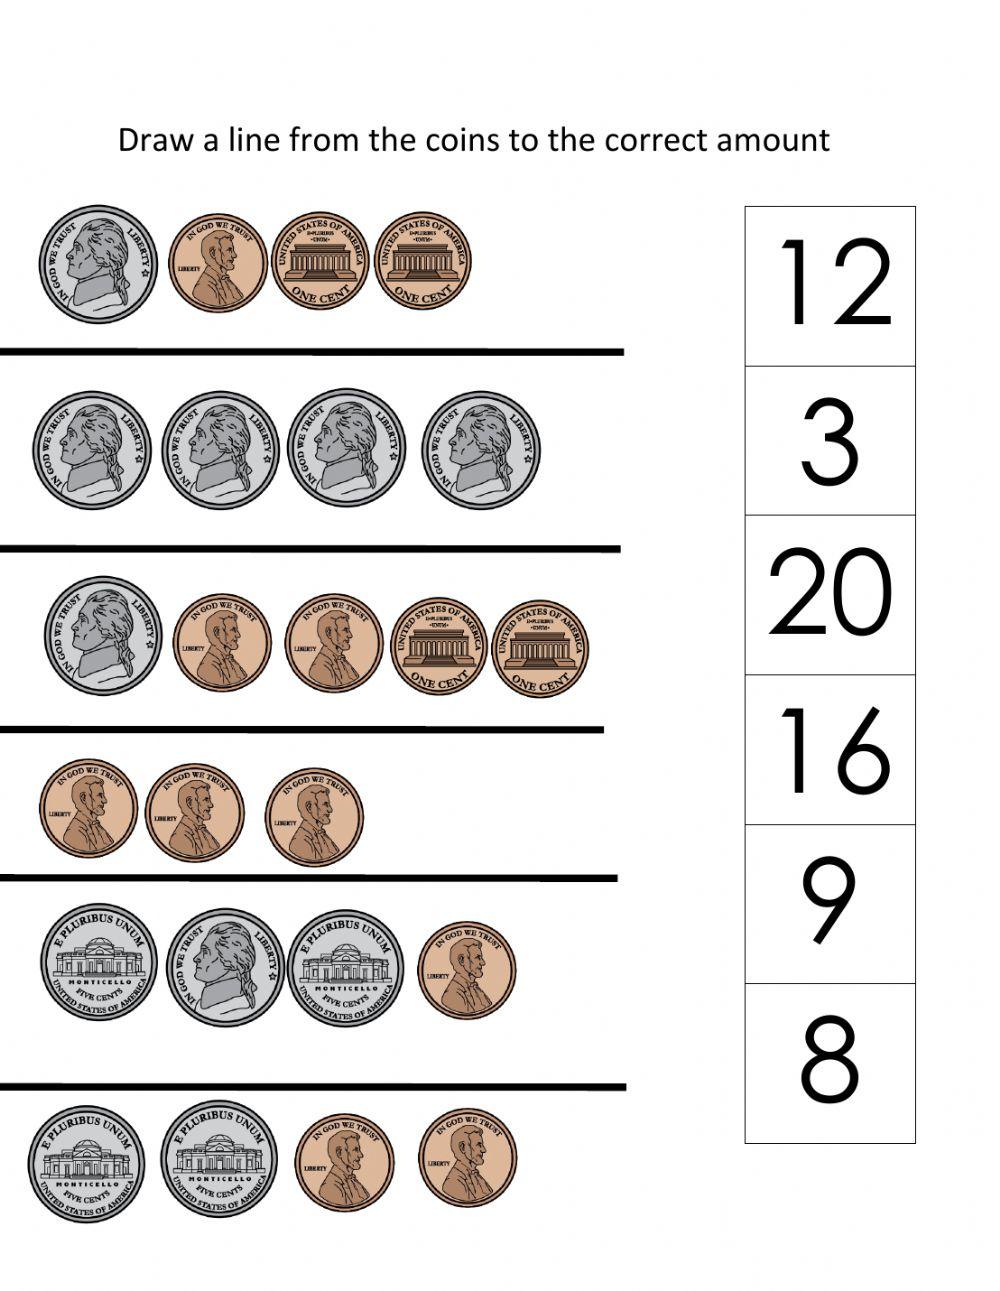 Nickels and pennies